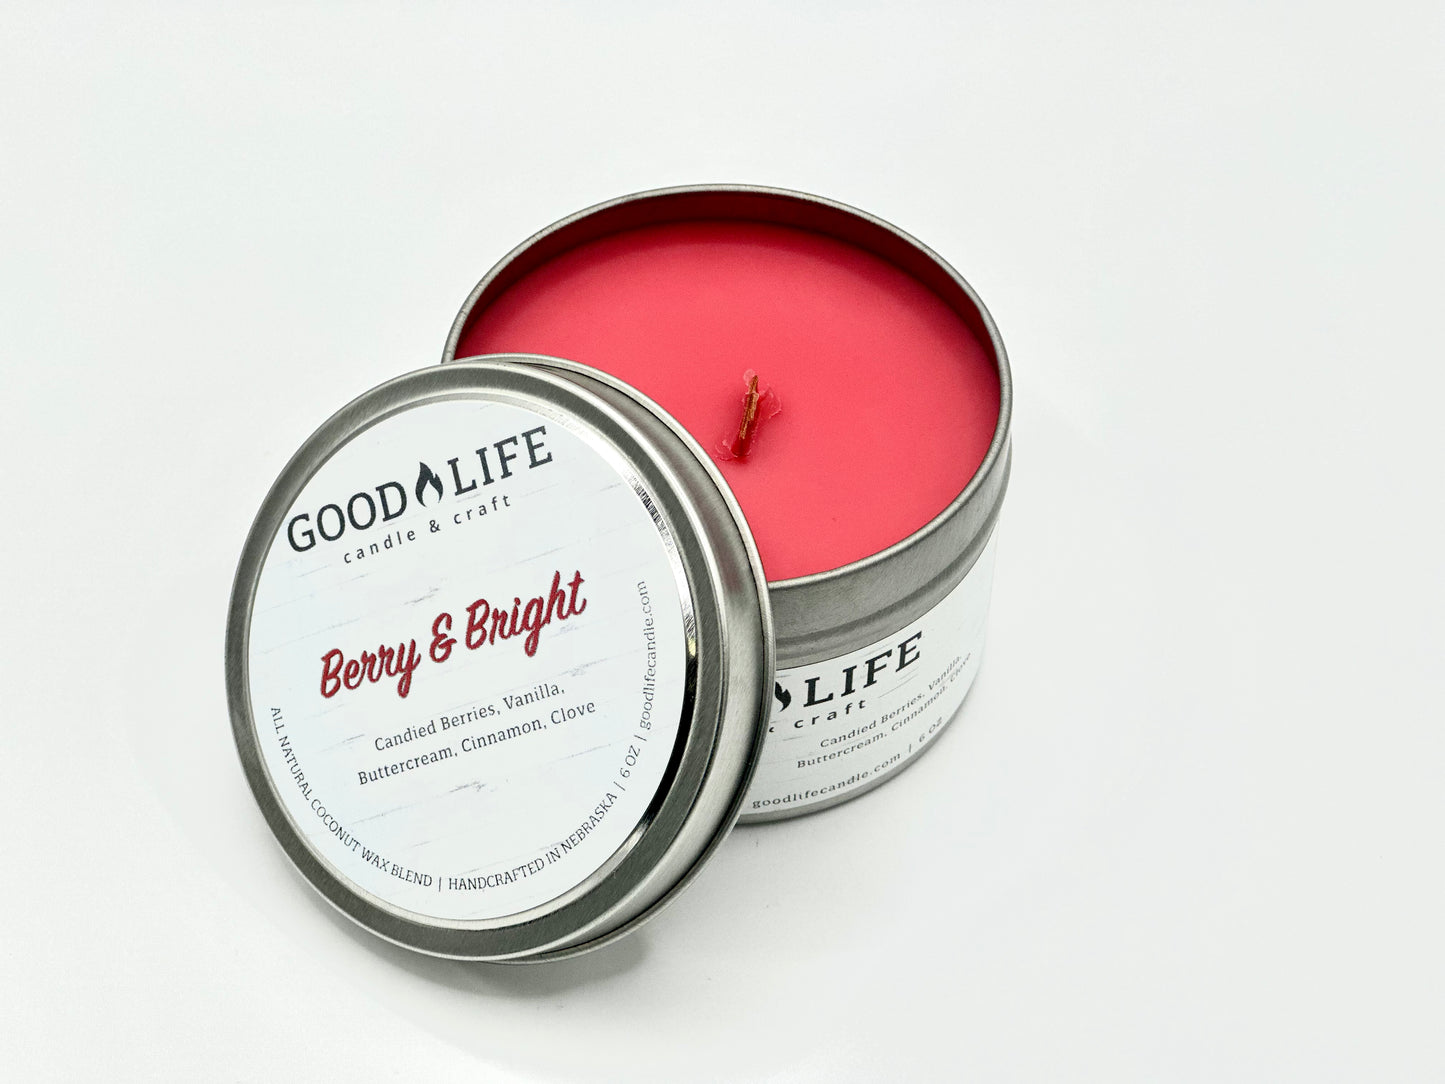 Good Life Candle & Craft Berry & Bright Scented Candle 6 oz Tin